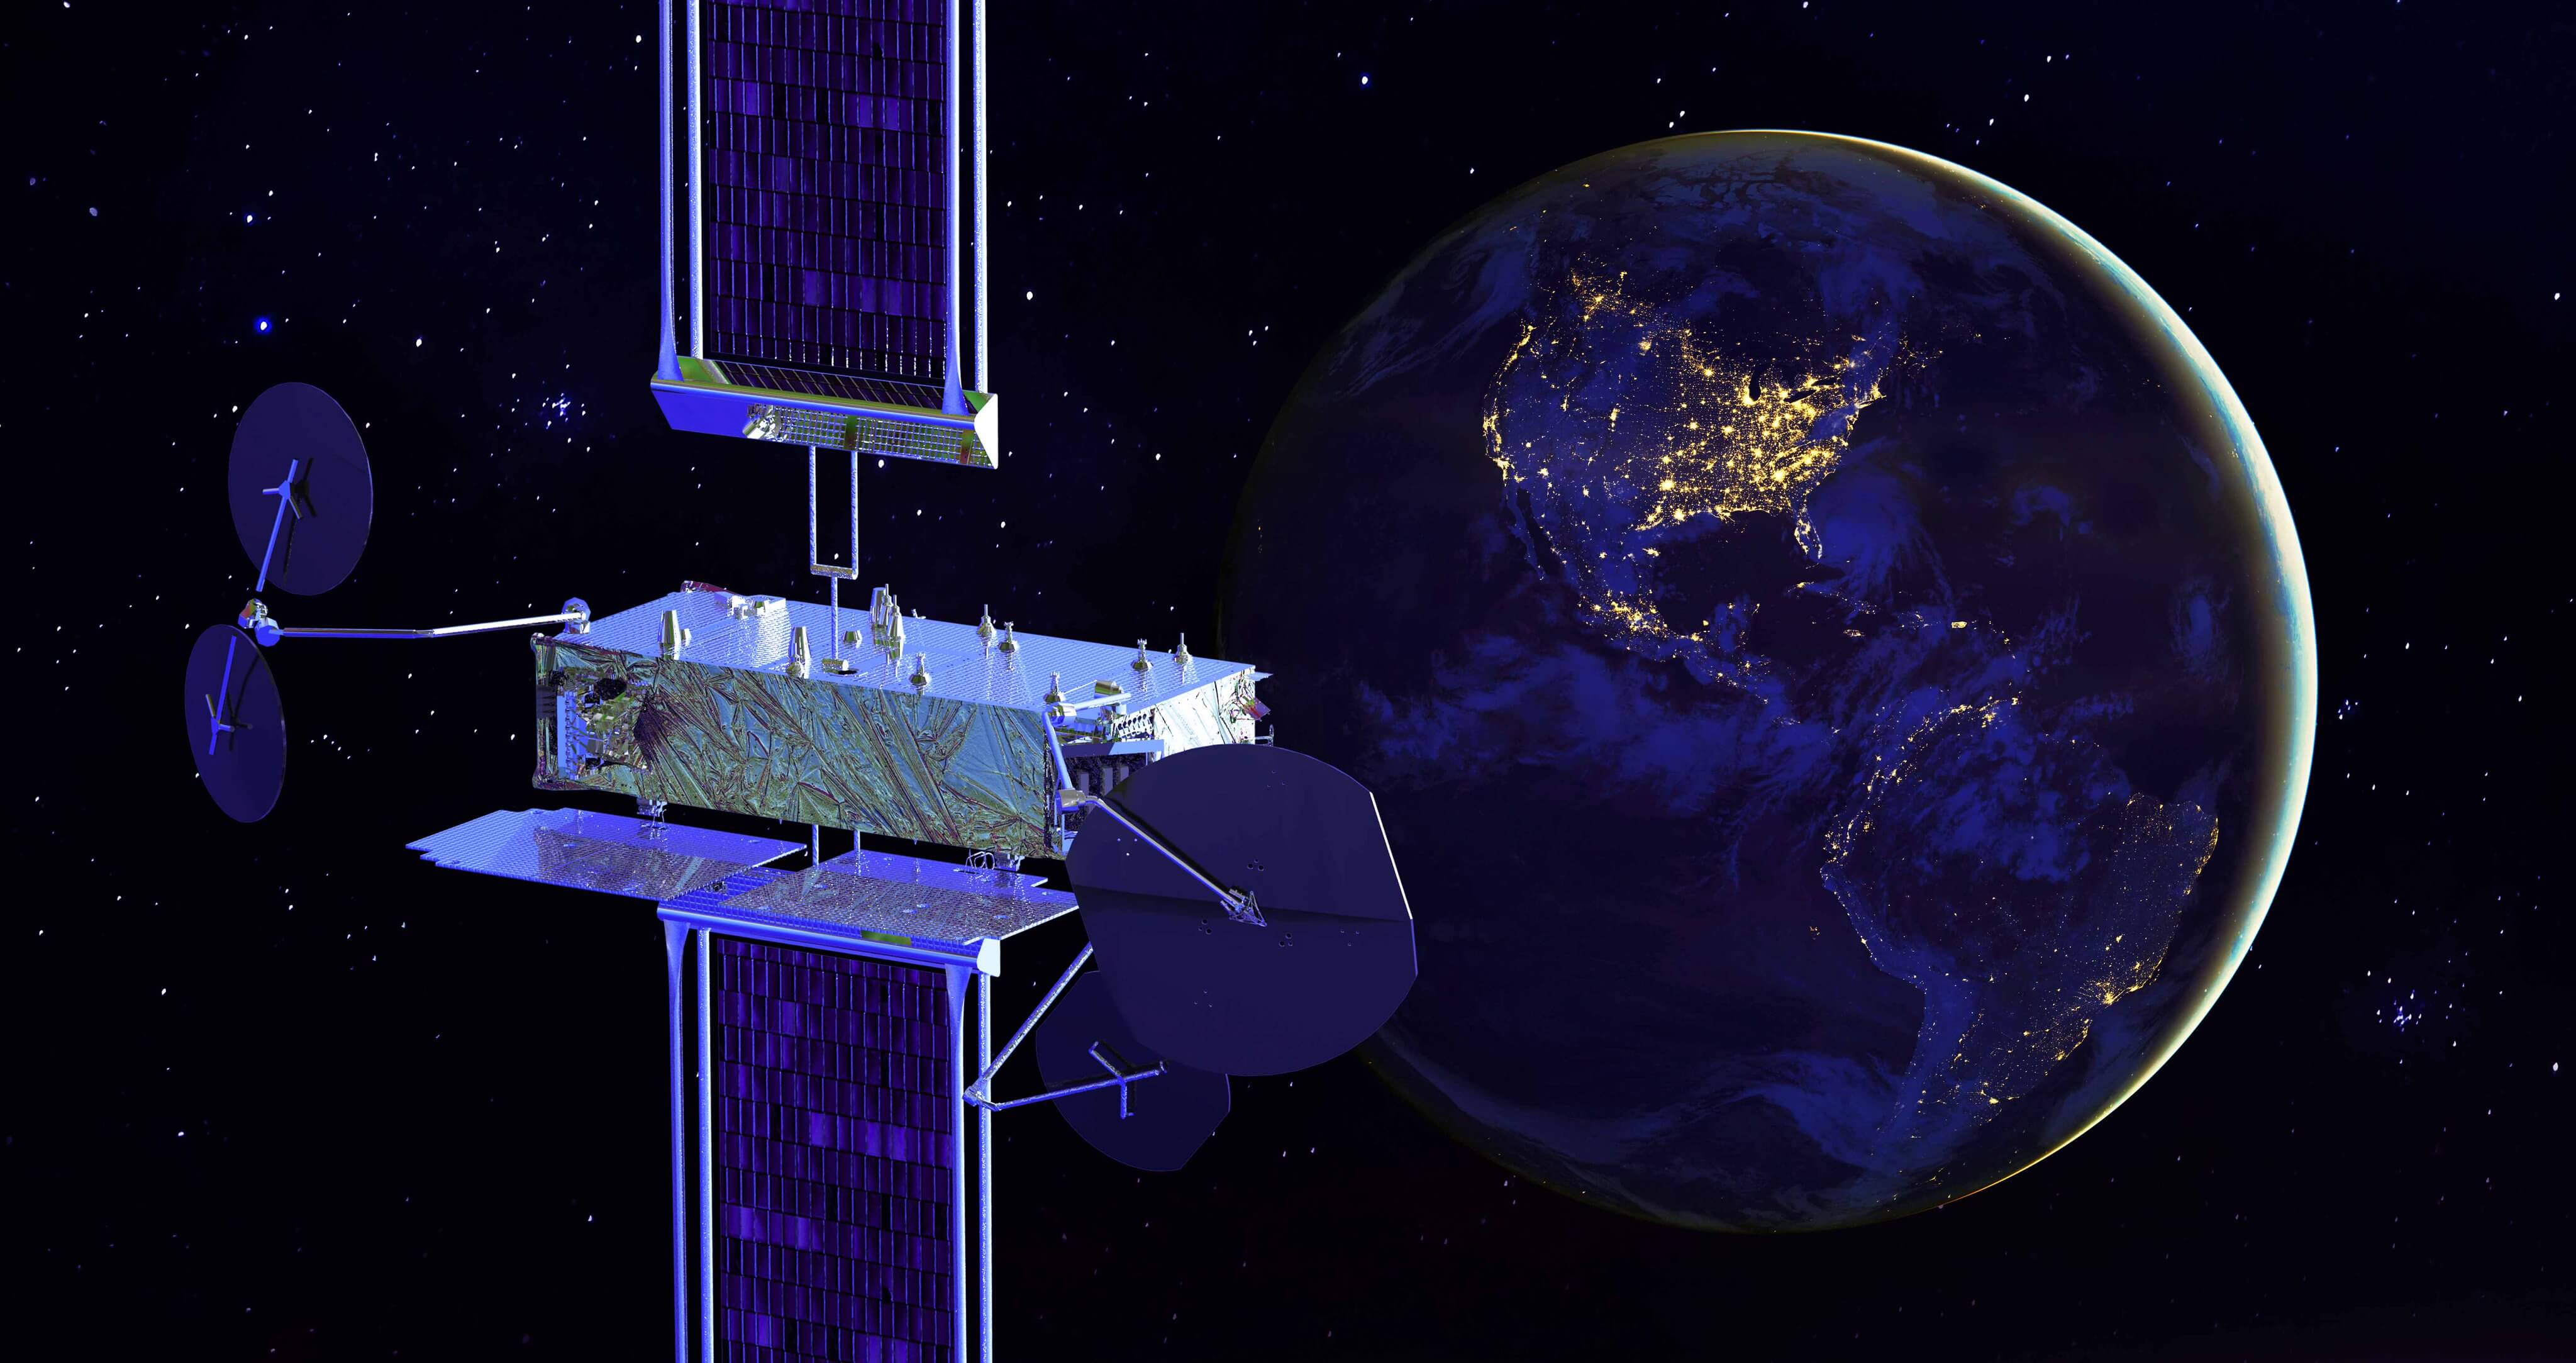 The market for geostationary telecommunications satellites remains low